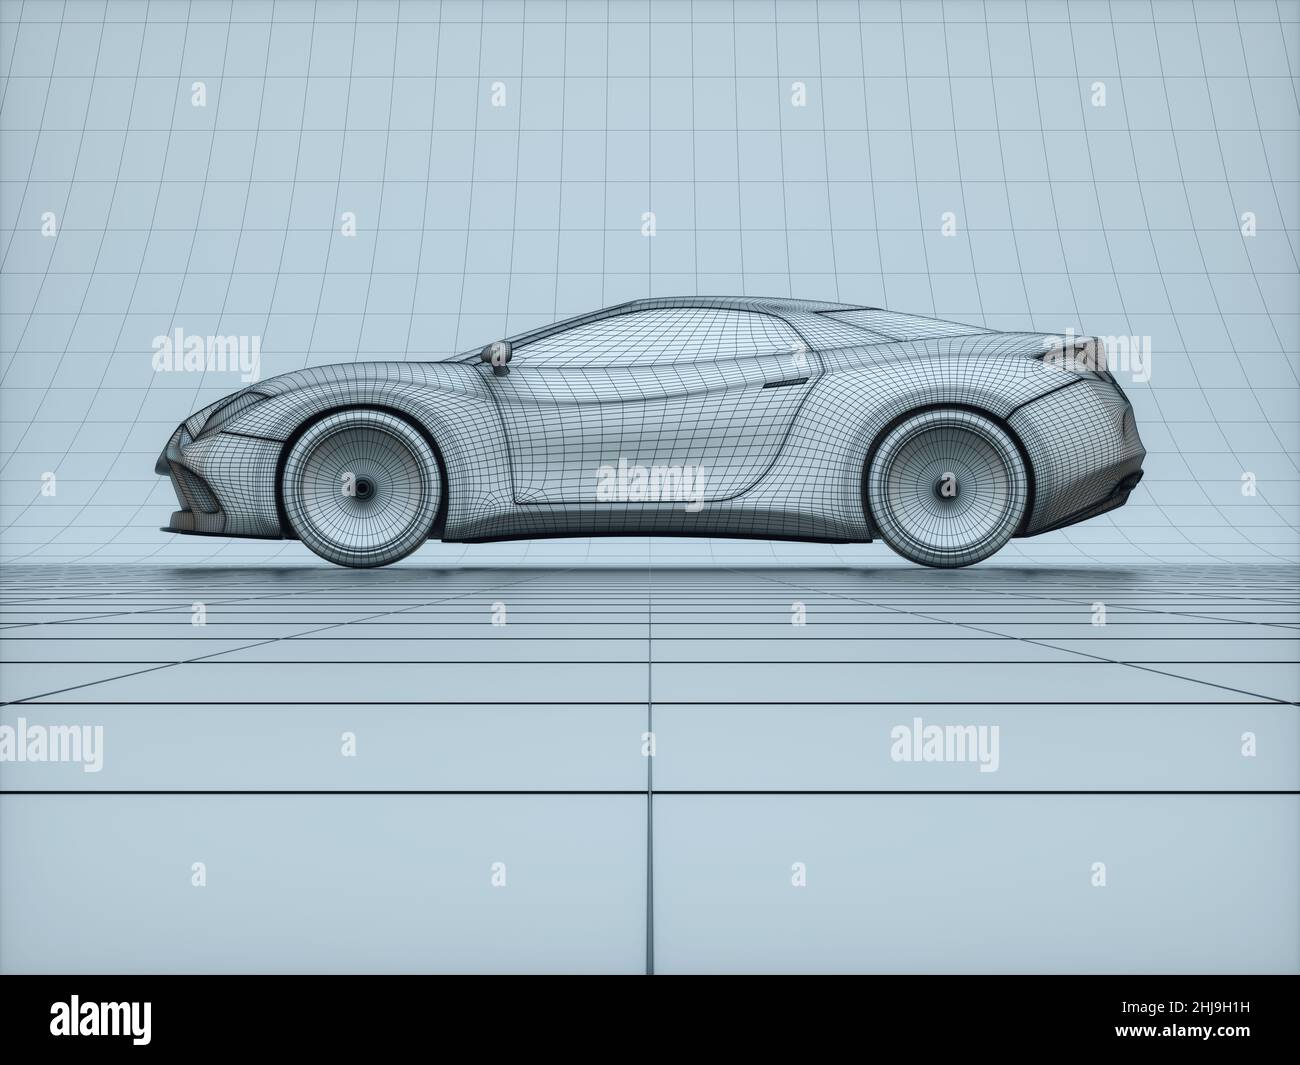 Sports car blueprint concept made in 3D software. Concept image of prototype and aerodynamic tests. Stock Photo